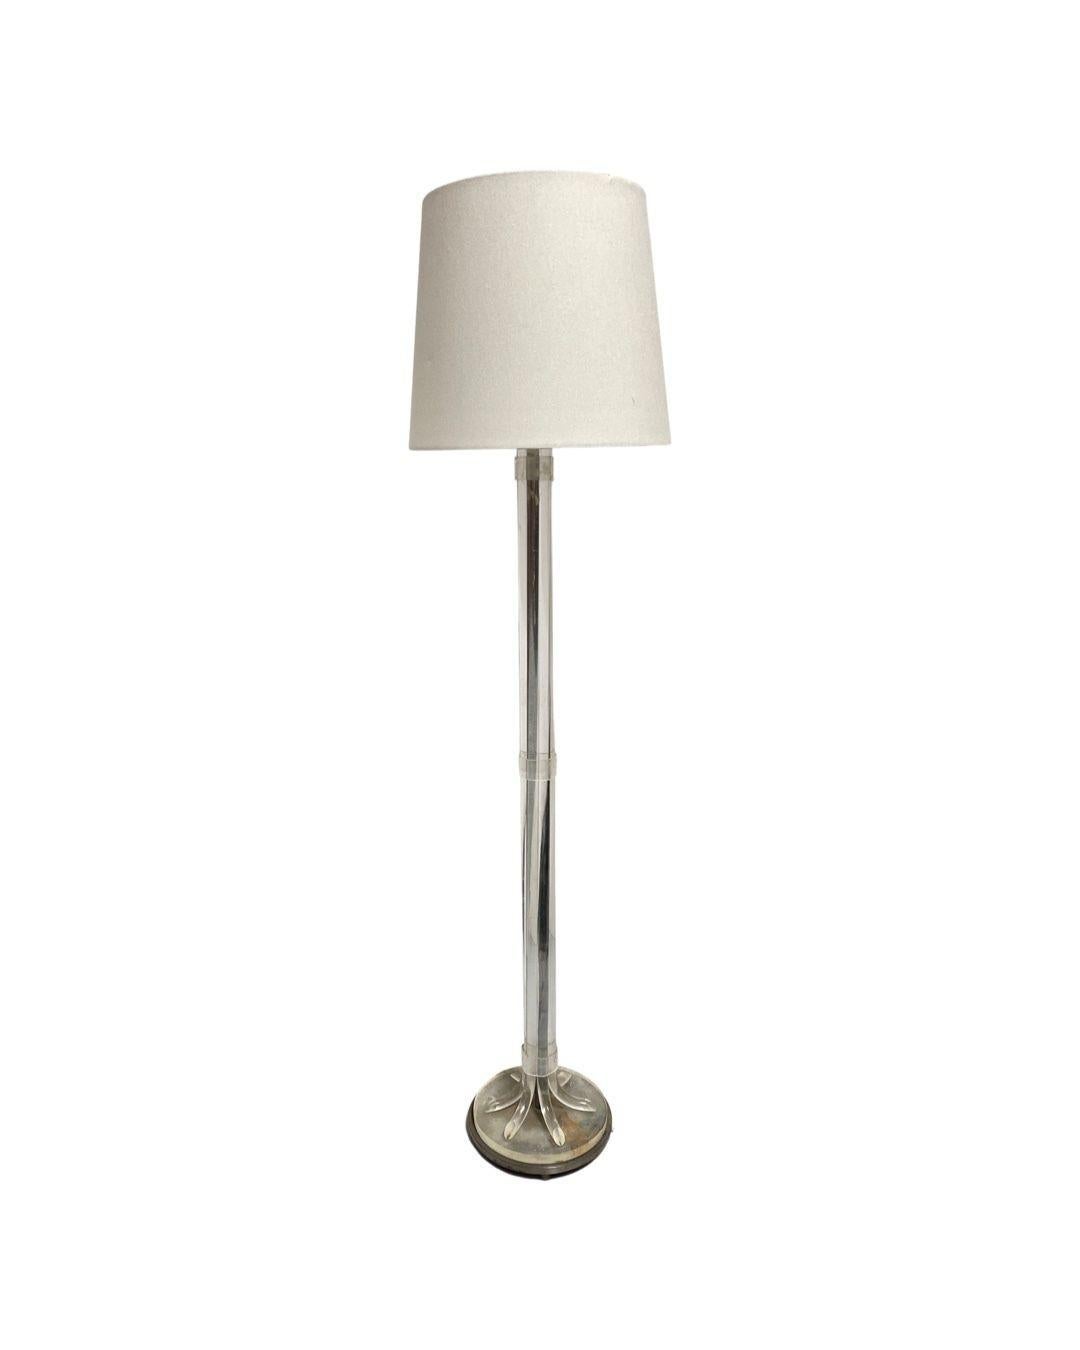 Original 1960s Lucite Hollywood Regency floor lamp featuring a chromed steel body with an organic floral-like lucite overall along the steam of the lamp. It is fixed on a 1/2